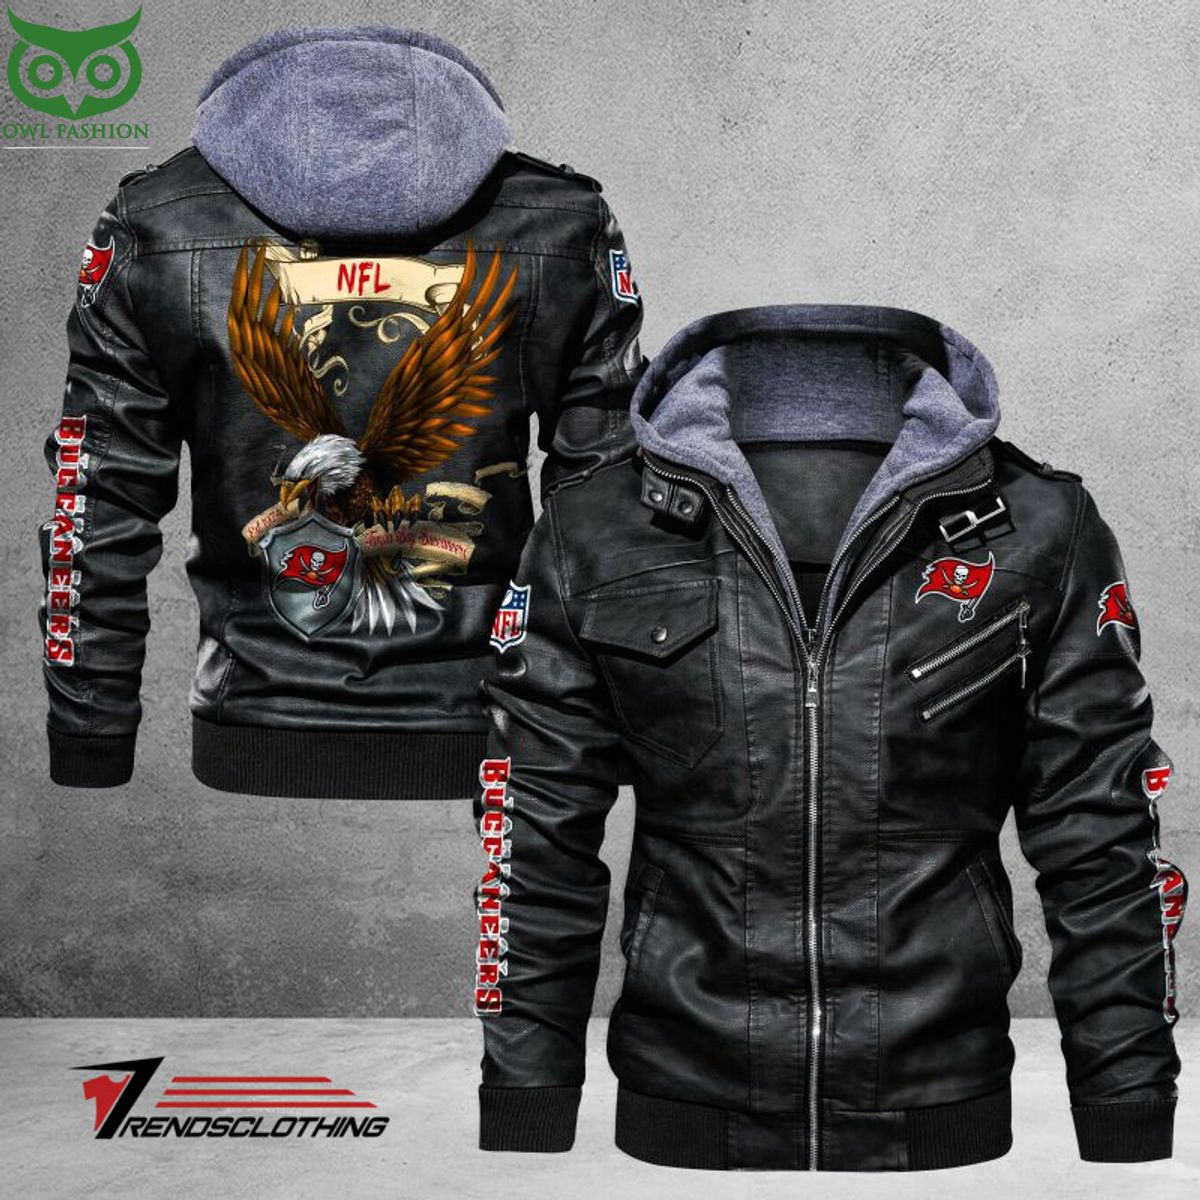 Tampa Bay Buccaneers Shop Jacket - Owl Trending 2D Leather Fashion